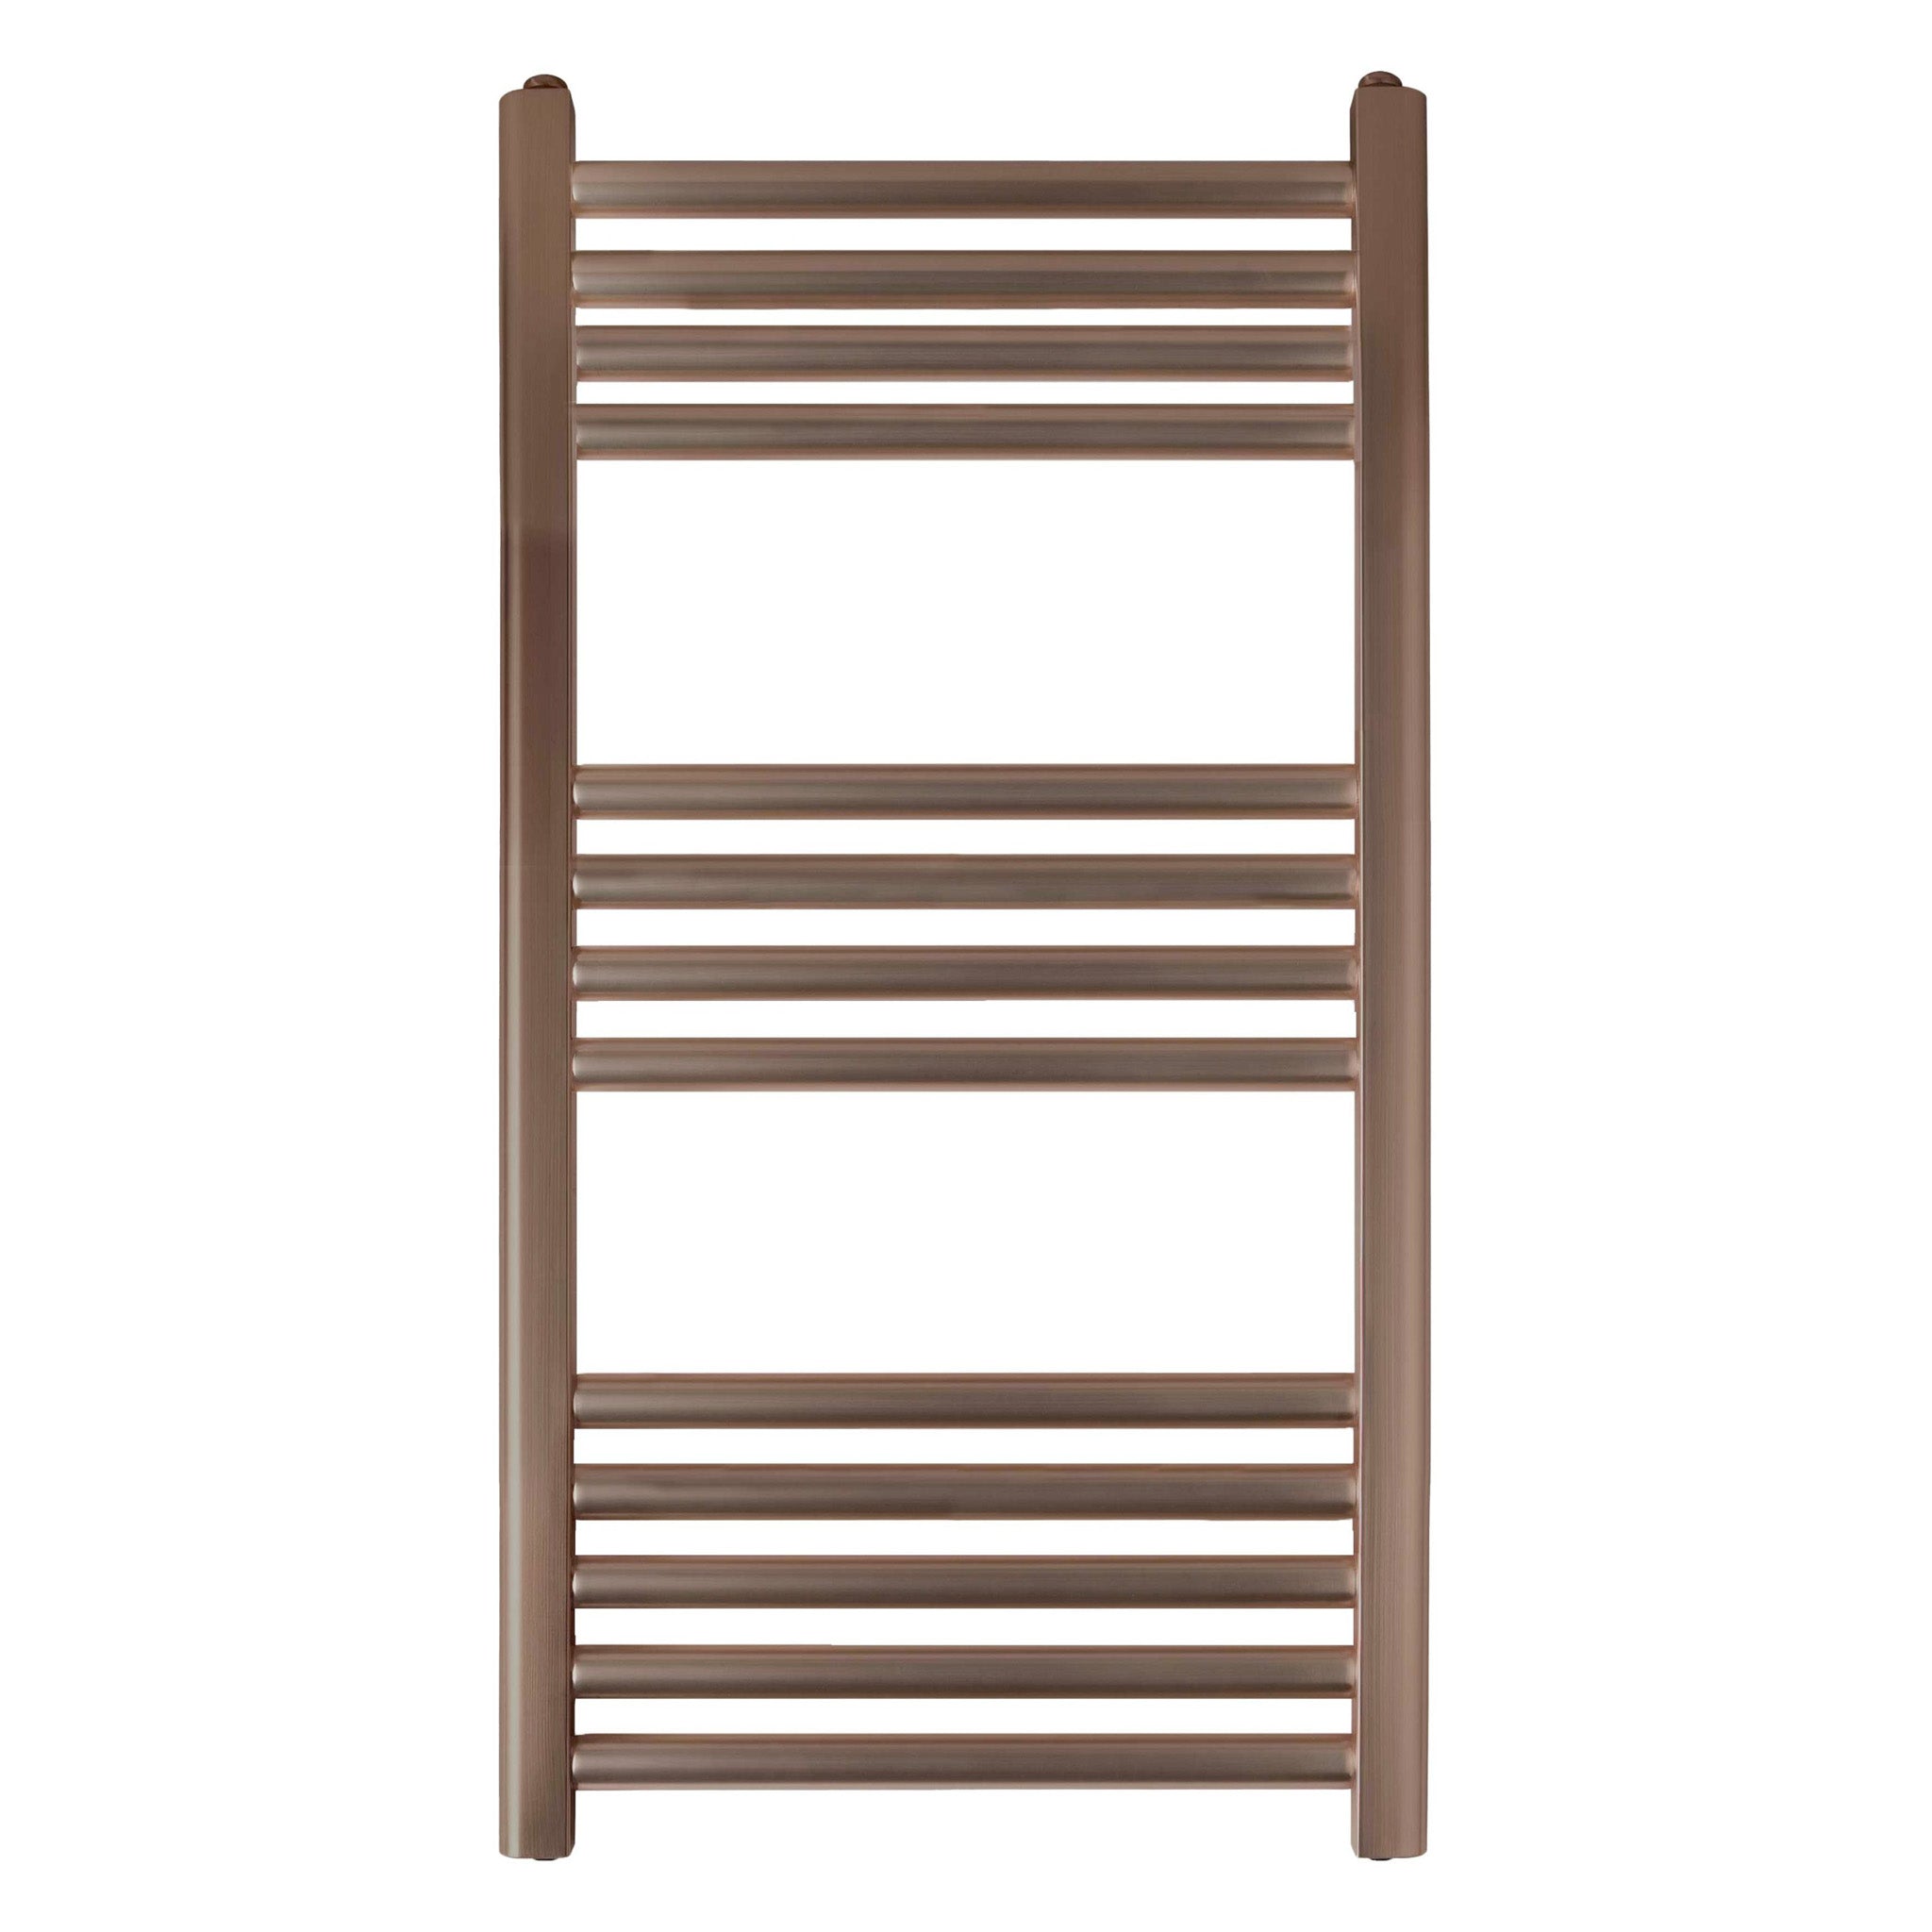 JTP VOS Wall Mounted Heated Towel Rail